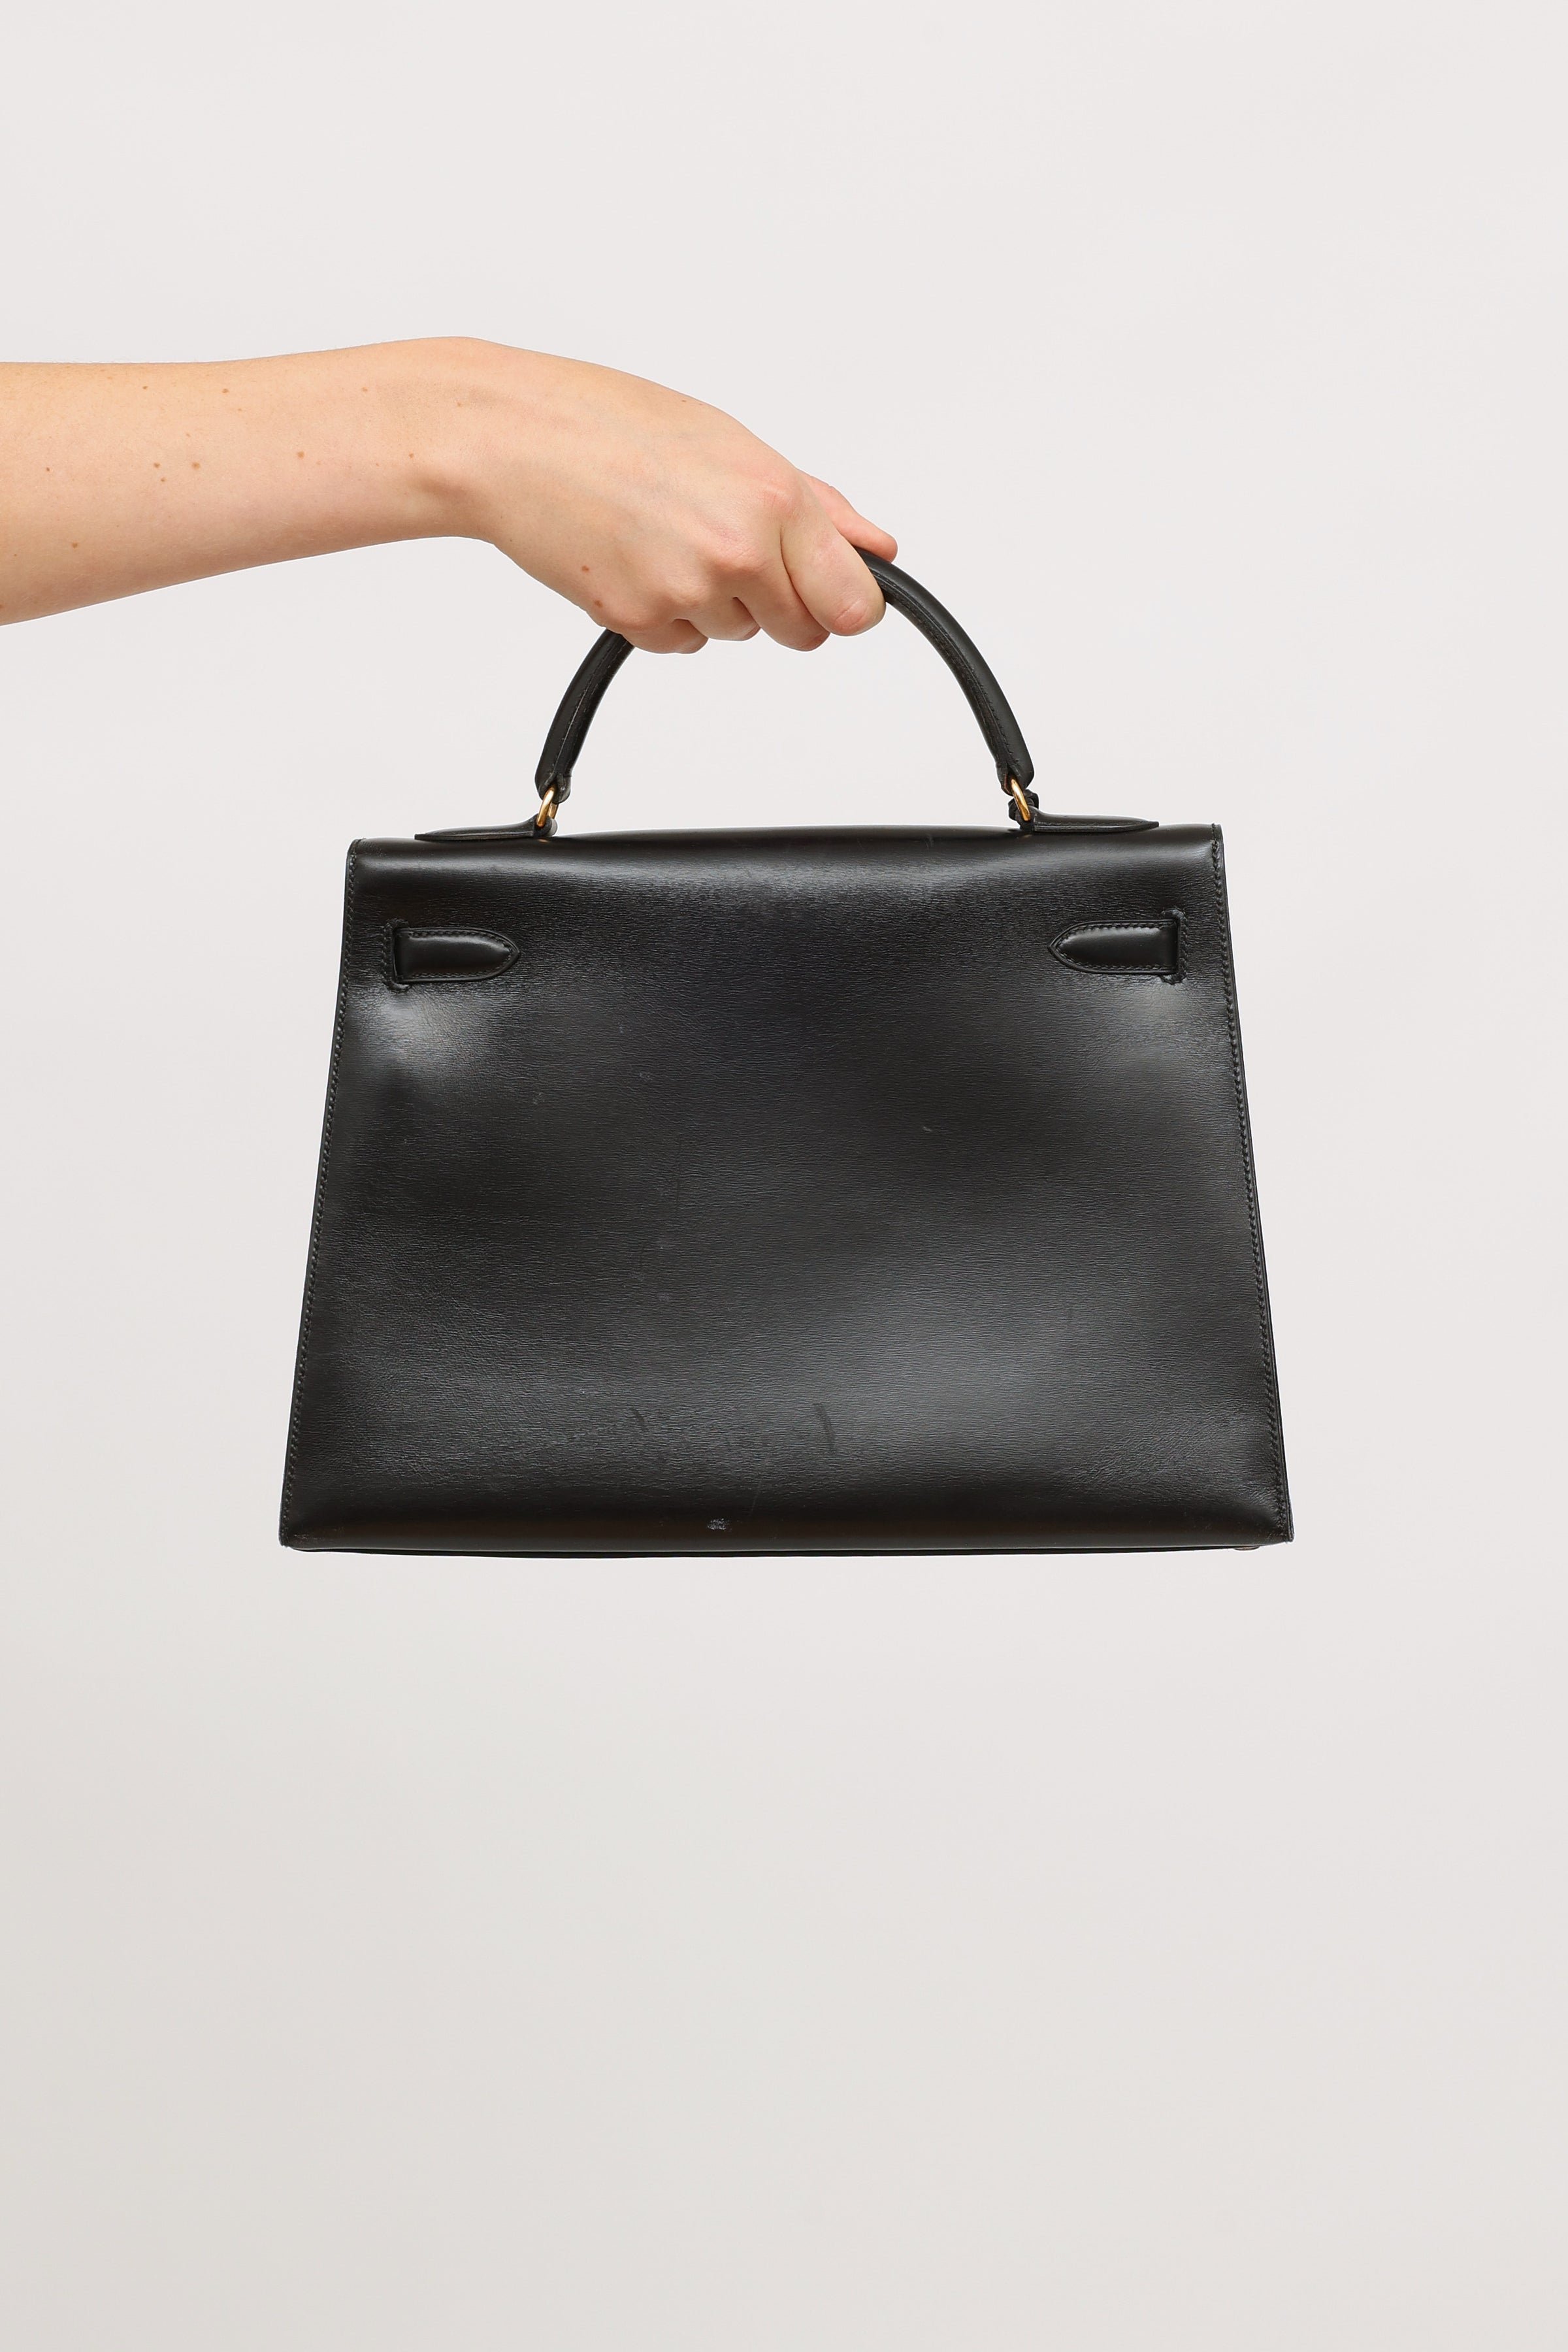 HERMES Kelly Sellier Size 32 Box Calf Leather Black